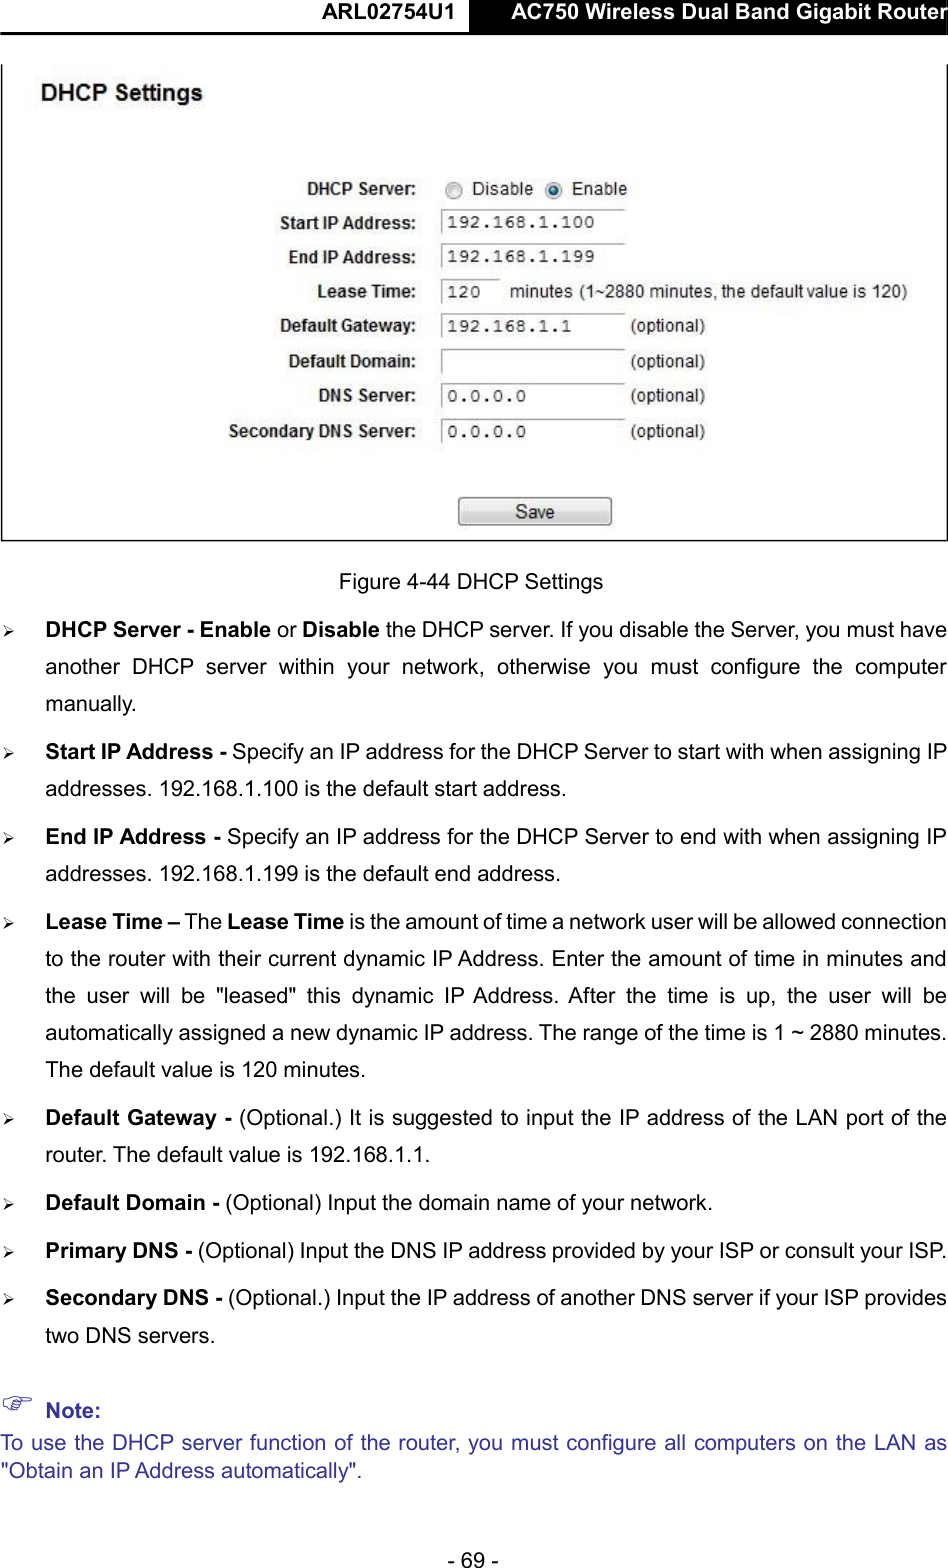  ARL02754U1  AC750 Wireless Dual Band Gigabit Router    - 69 -   Figure 4-44 DHCP Settings   DHCP Server - Enable or Disable the DHCP server. If you disable the Server, you must have another  DHCP  server  within  your  network,  otherwise  you  must  configure  the  computer manually.   Start IP Address - Specify an IP address for the DHCP Server to start with when assigning IP addresses. 192.168.1.100 is the default start address.   End IP Address - Specify an IP address for the DHCP Server to end with when assigning IP addresses. 192.168.1.199 is the default end address.   Lease Time – The Lease Time is the amount of time a network user will be allowed connection to the router with their current dynamic IP Address. Enter the amount of time in minutes and the  user  will  be  &quot;leased&quot;  this  dynamic  IP Address. After  the  time  is  up,  the  user  will  be automatically assigned a new dynamic IP address. The range of the time is 1 ~ 2880 minutes. The default value is 120 minutes.   Default Gateway - (Optional.) It is suggested to input the IP address of the LAN port of the router. The default value is 192.168.1.1.   Default Domain - (Optional) Input the domain name of your network.   Primary DNS - (Optional) Input the DNS IP address provided by your ISP or consult your ISP.   Secondary DNS - (Optional.) Input the IP address of another DNS server if your ISP provides two DNS servers.   Note:  To use the DHCP server function of the router, you must configure all computers on the LAN as &quot;Obtain an IP Address automatically&quot;.    